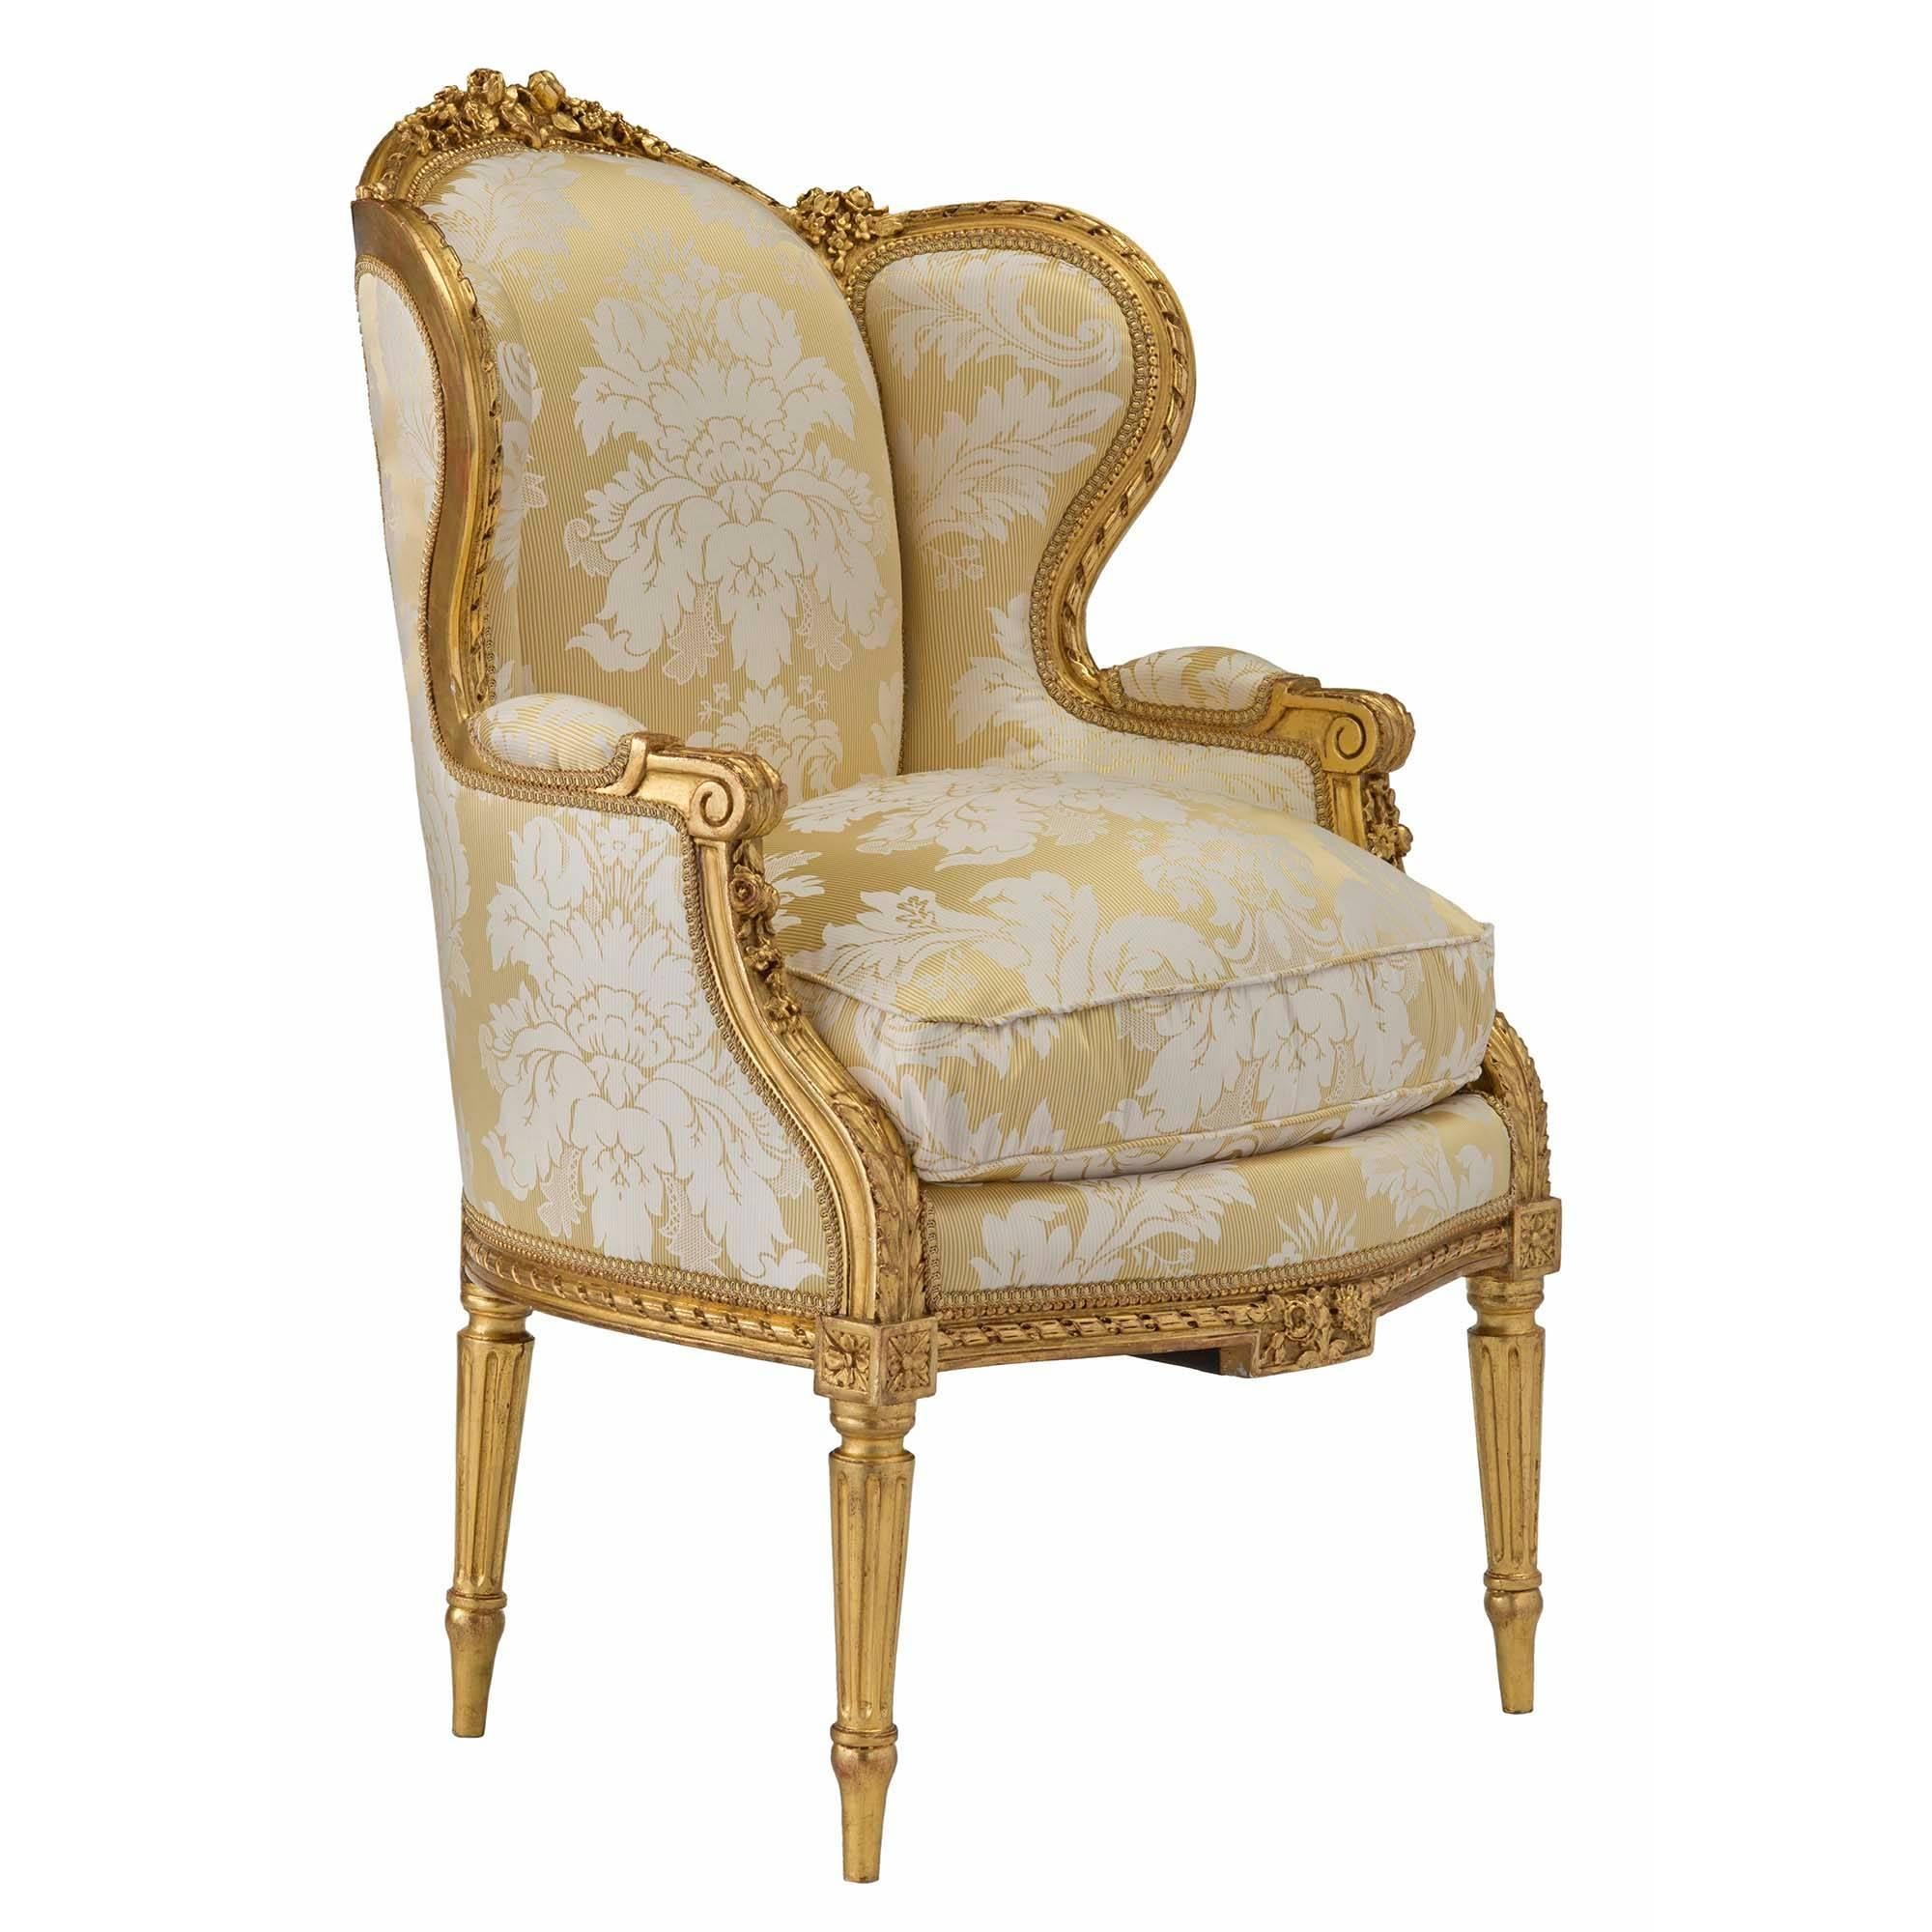 An exquisite pair of French 19th century Louis XVI style giltwood Bergères. Each chair is raised by four circular tapered fluted legs with rosette blocks at the front. A richly chased giltwood frieze has a twisted rope design with foliate front